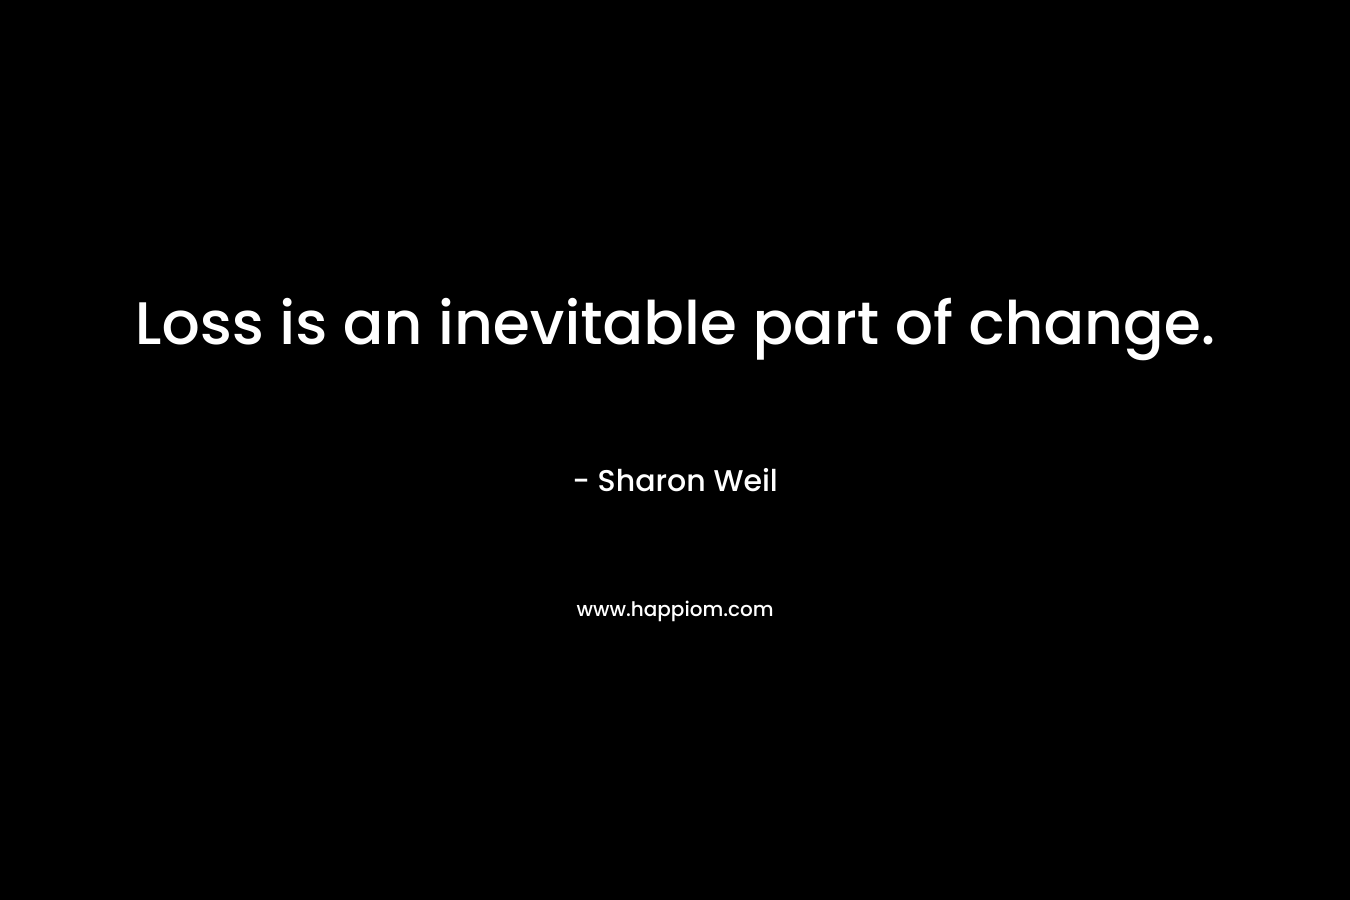 Loss is an inevitable part of change.